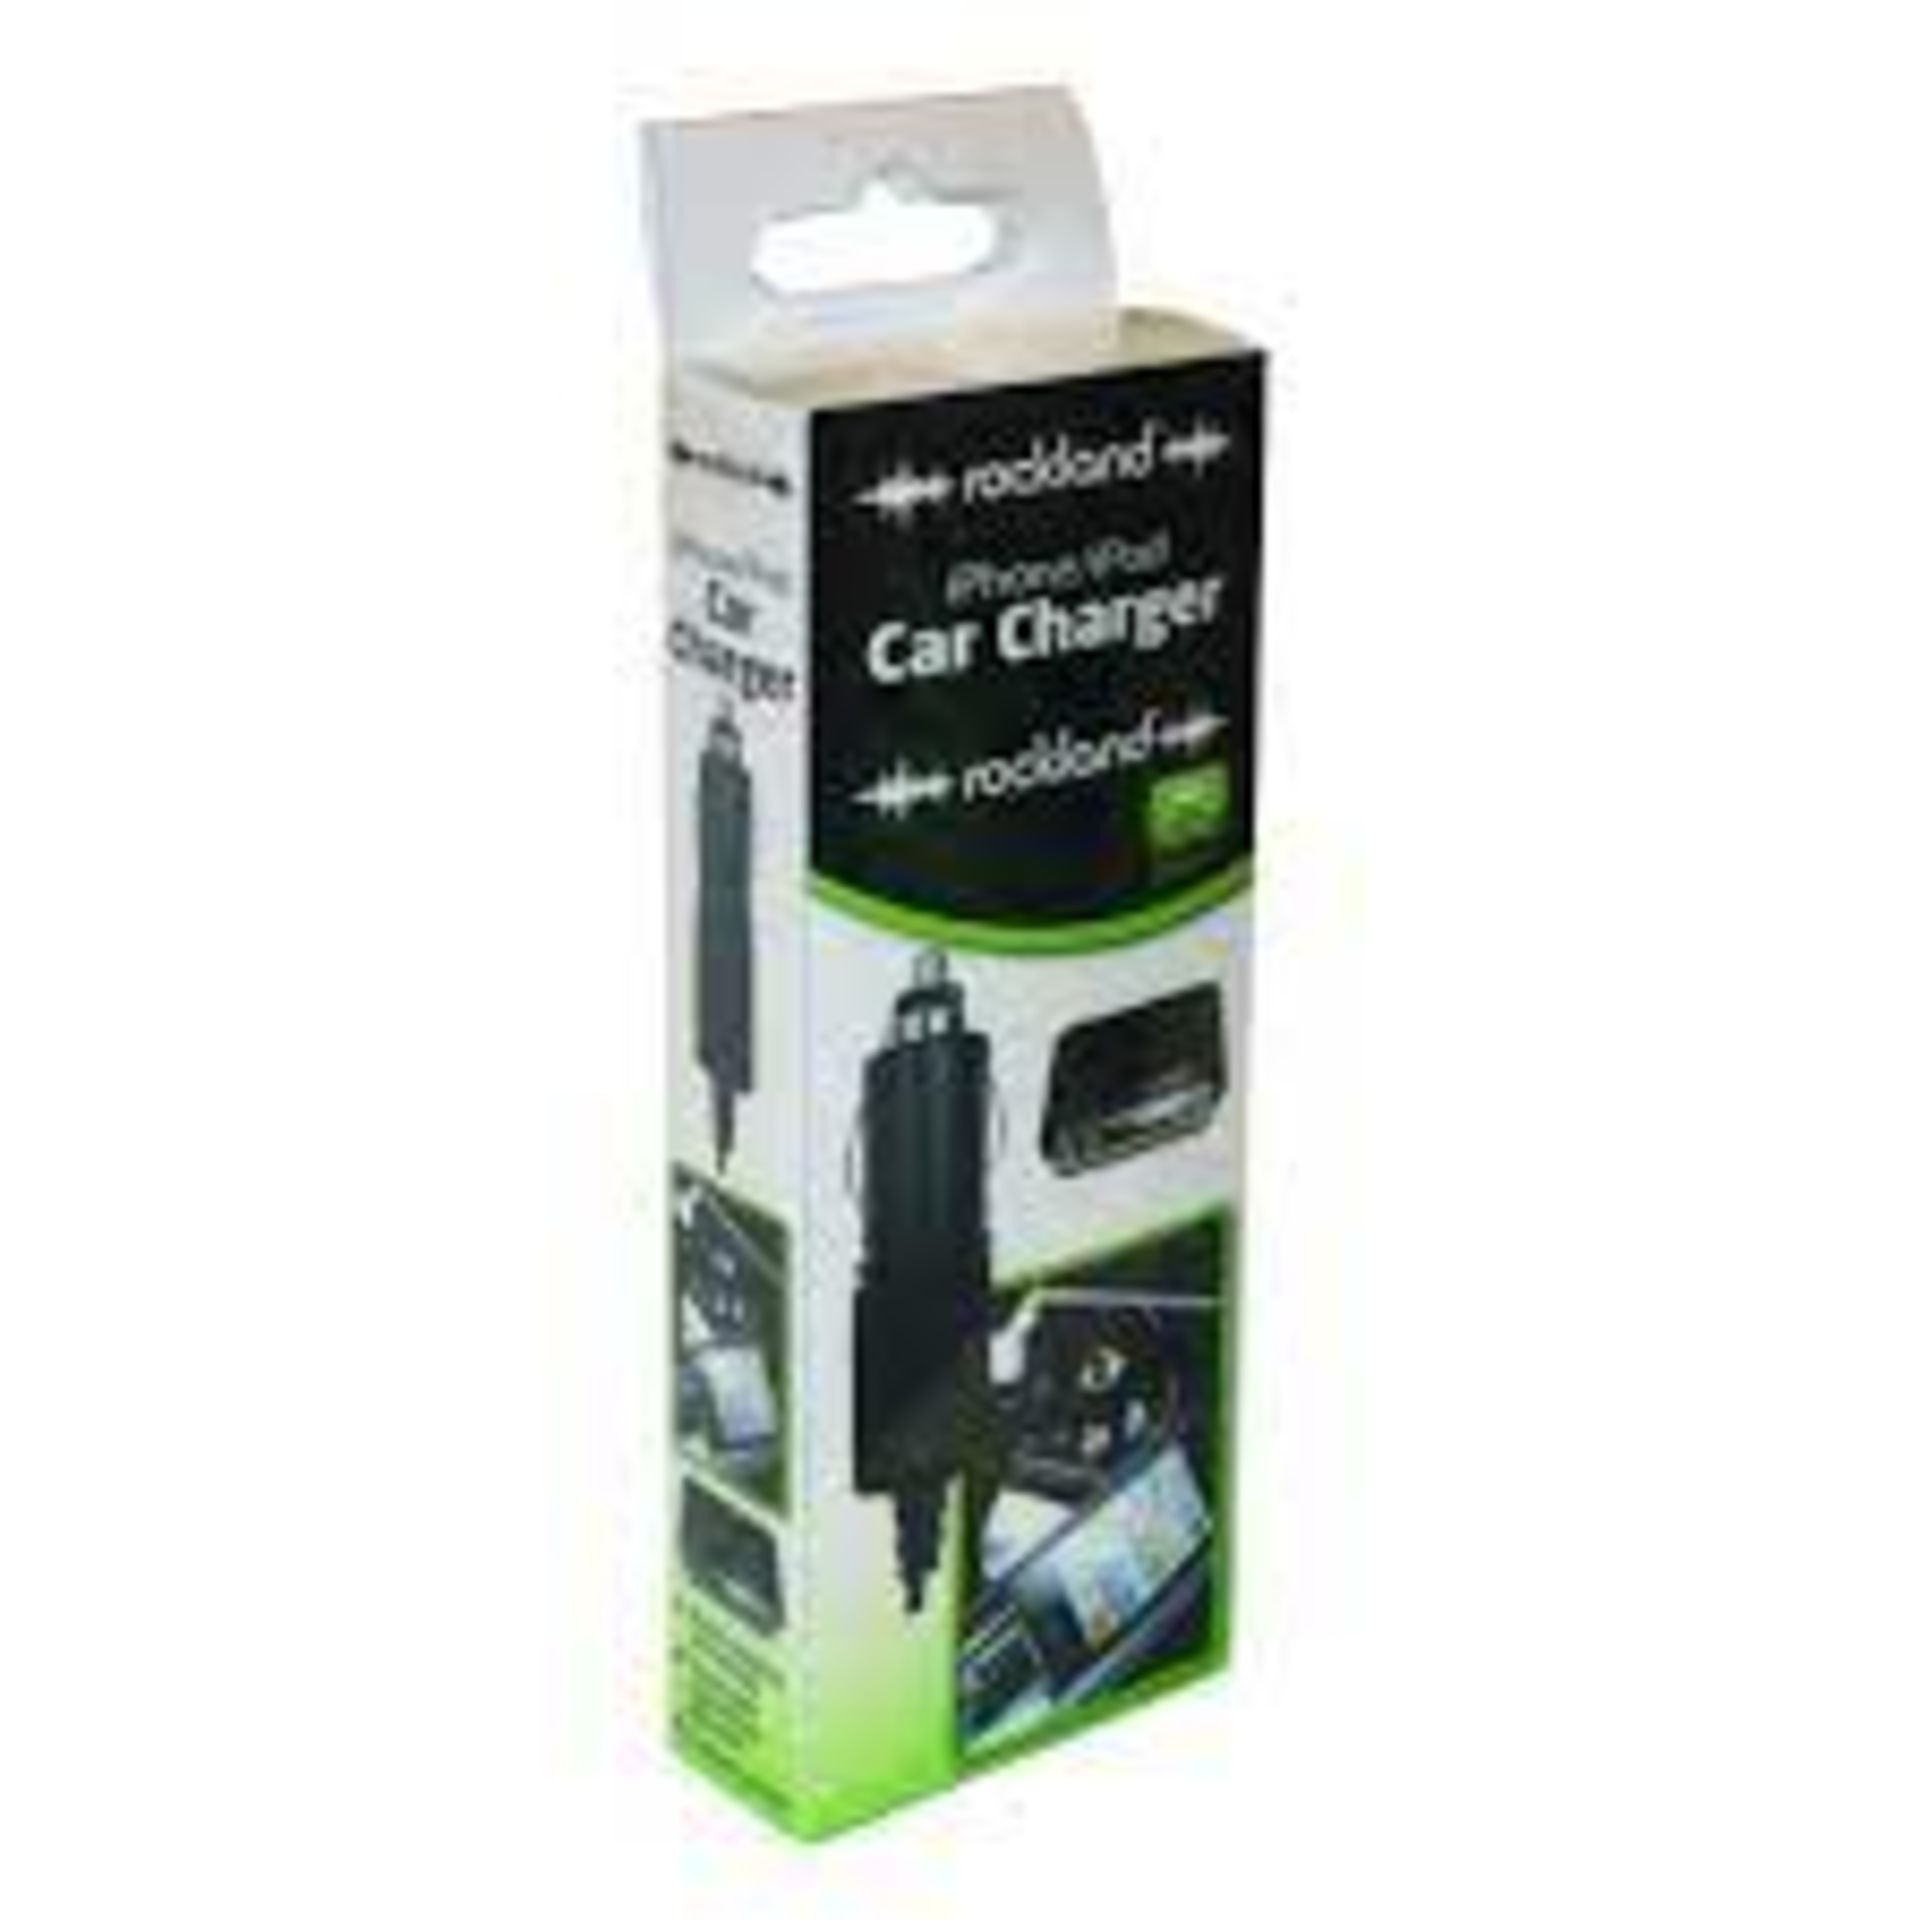 144 X BRAND NEW ROCKLAND IPHONE/IPOD CAR CHARGERS R4-7